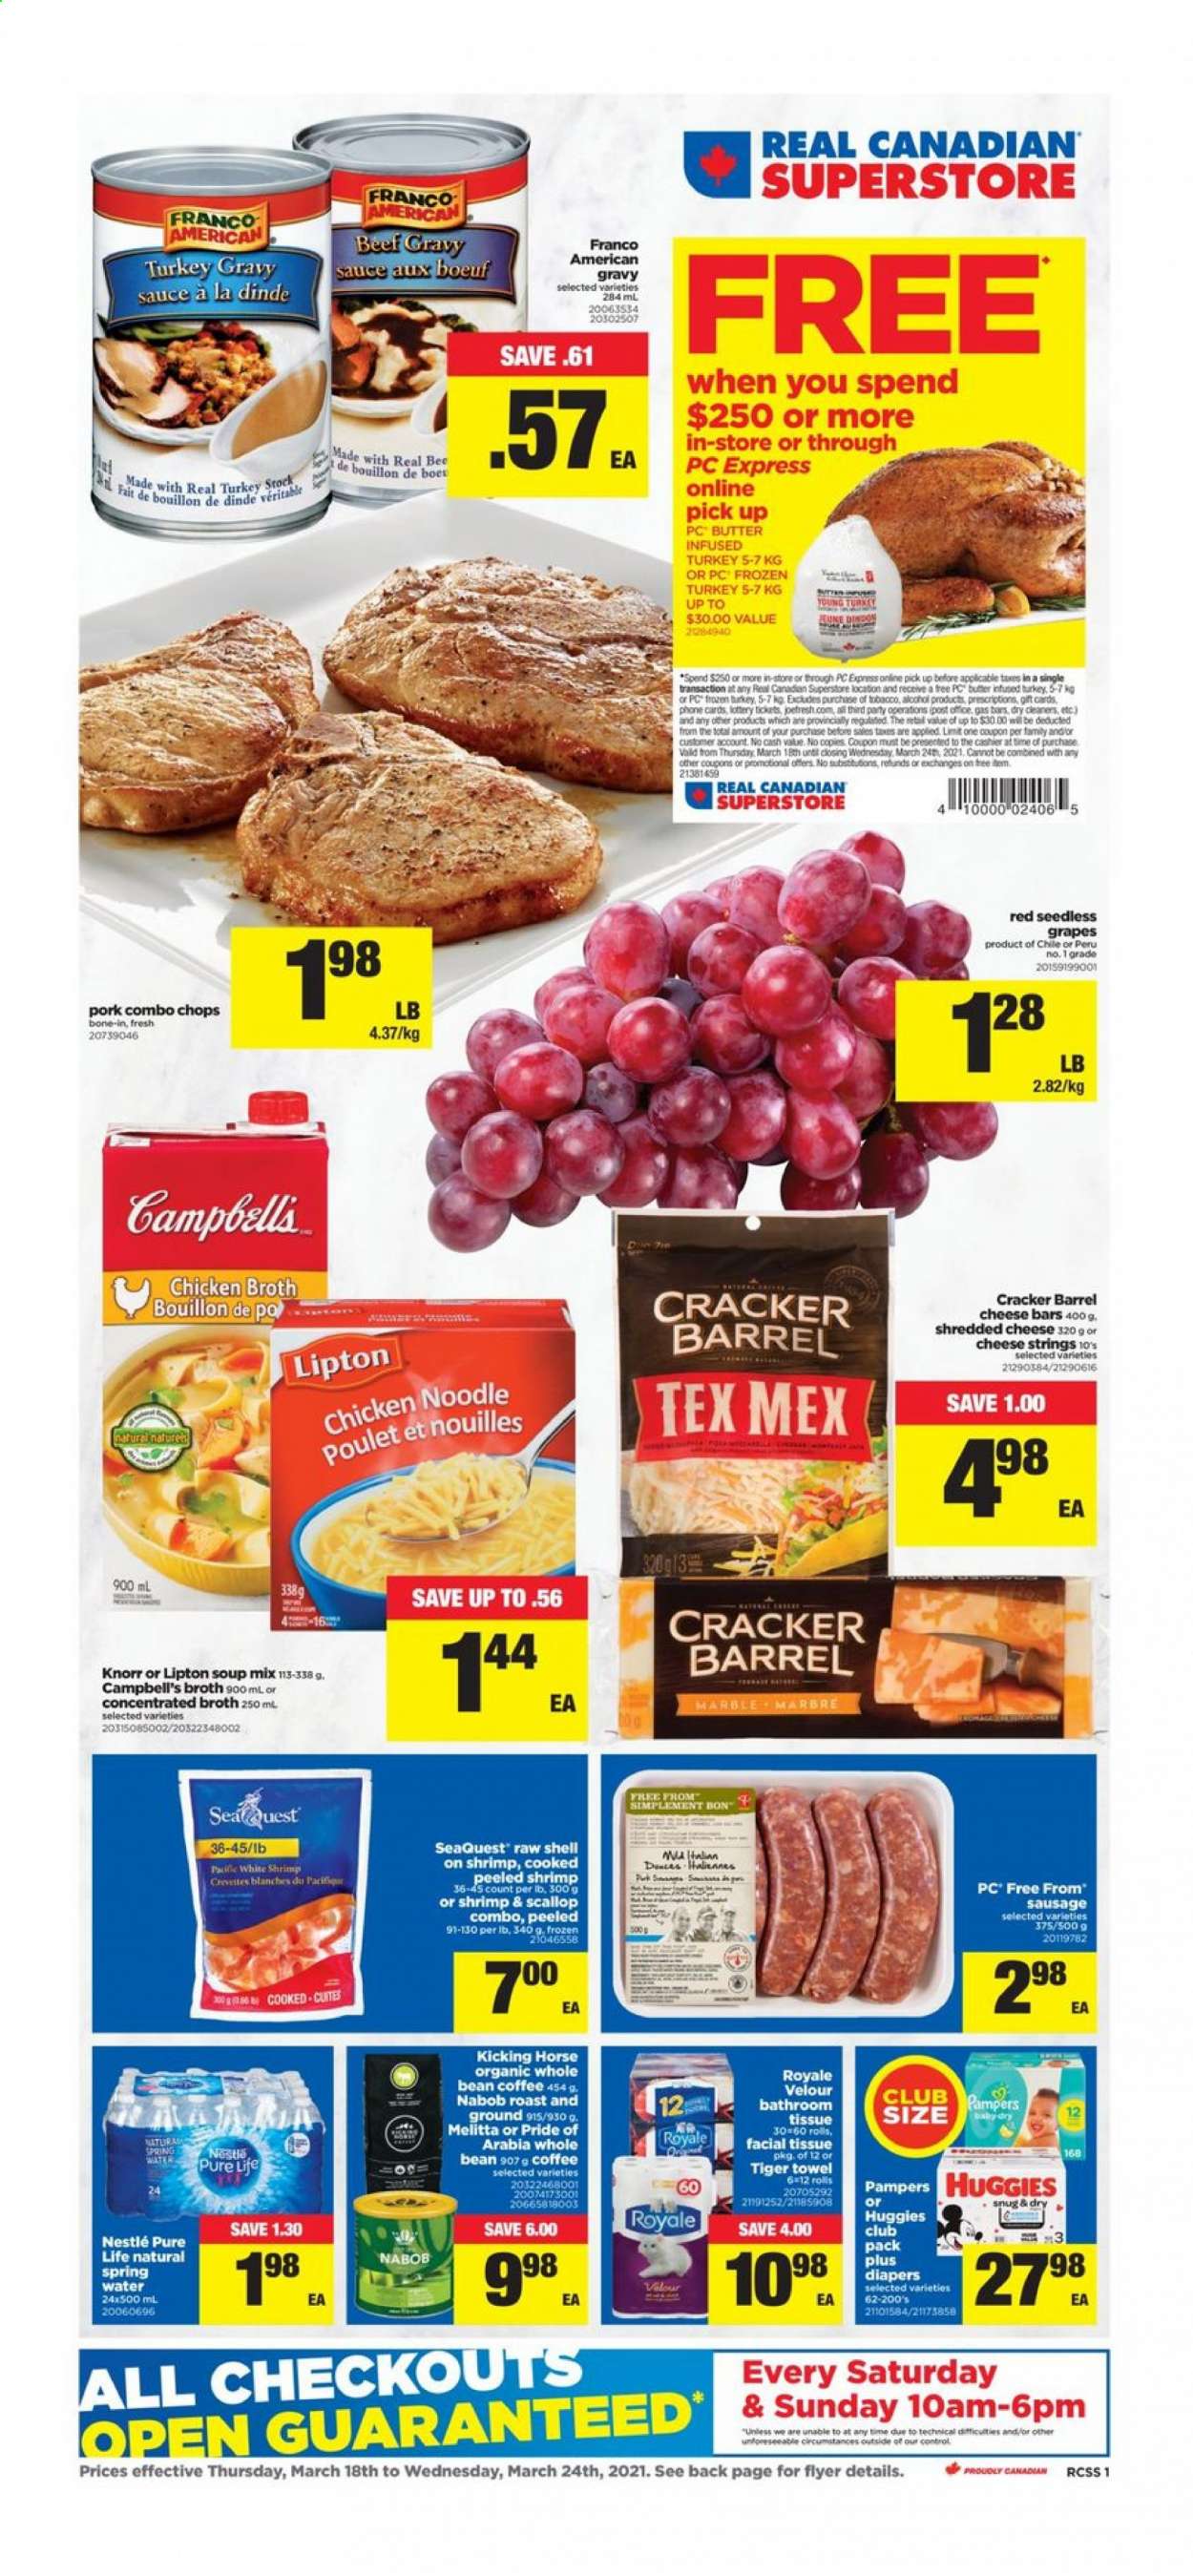 thumbnail - Real Canadian Superstore Flyer - March 18, 2021 - March 24, 2021 - Sales products - grapes, seedless grapes, scallops, beef gravy, Campbell's, soup mix, soup, sauce, noodles, sausage, shredded cheese, butter, crackers, bouillon, chicken broth, broth, turkey gravy, spring water, coffee, alcohol, whole turkey, turkey, nappies, bath tissue, towel, Knorr, Nestlé, Huggies, Pampers. Page 1.